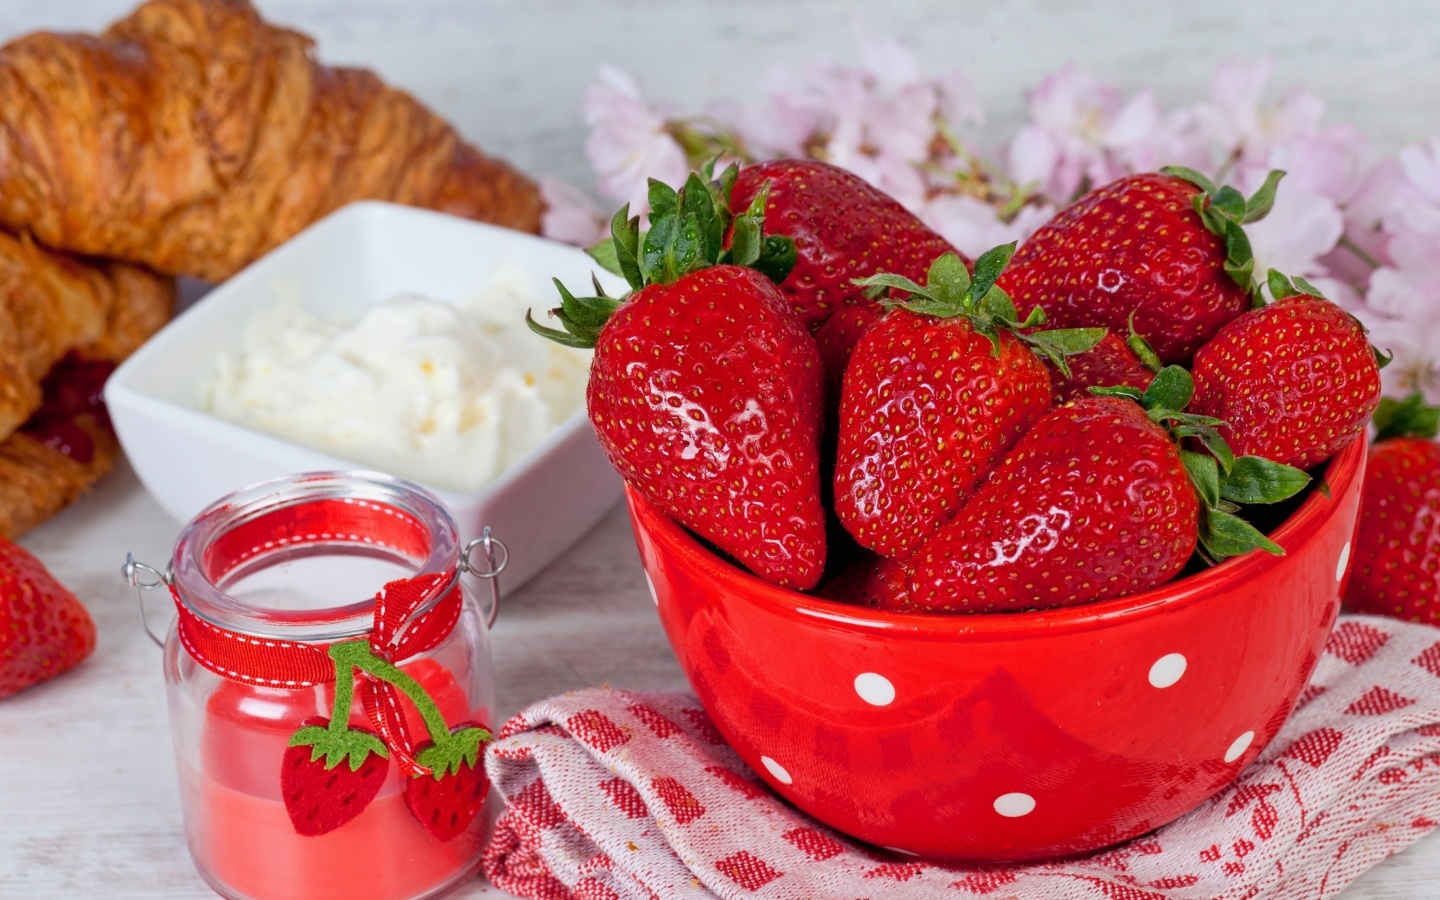 Strawberry and Jam wallpaper 1440x900